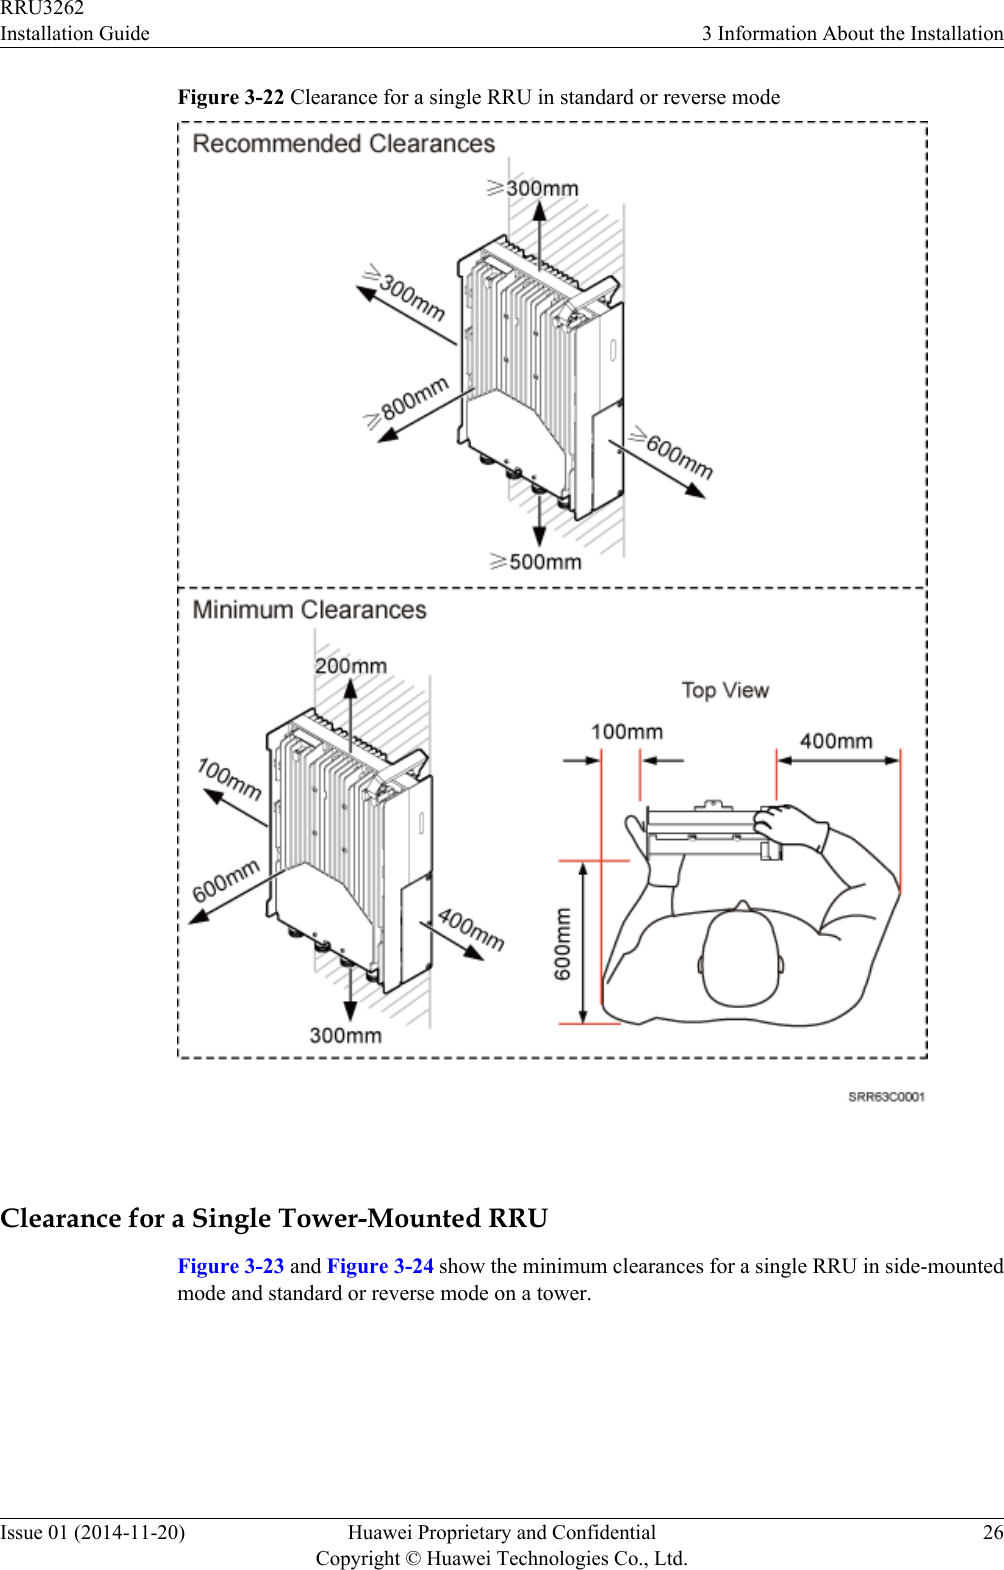 Figure 3-22 Clearance for a single RRU in standard or reverse mode Clearance for a Single Tower-Mounted RRUFigure 3-23 and Figure 3-24 show the minimum clearances for a single RRU in side-mountedmode and standard or reverse mode on a tower.RRU3262Installation Guide 3 Information About the InstallationIssue 01 (2014-11-20) Huawei Proprietary and ConfidentialCopyright © Huawei Technologies Co., Ltd.26